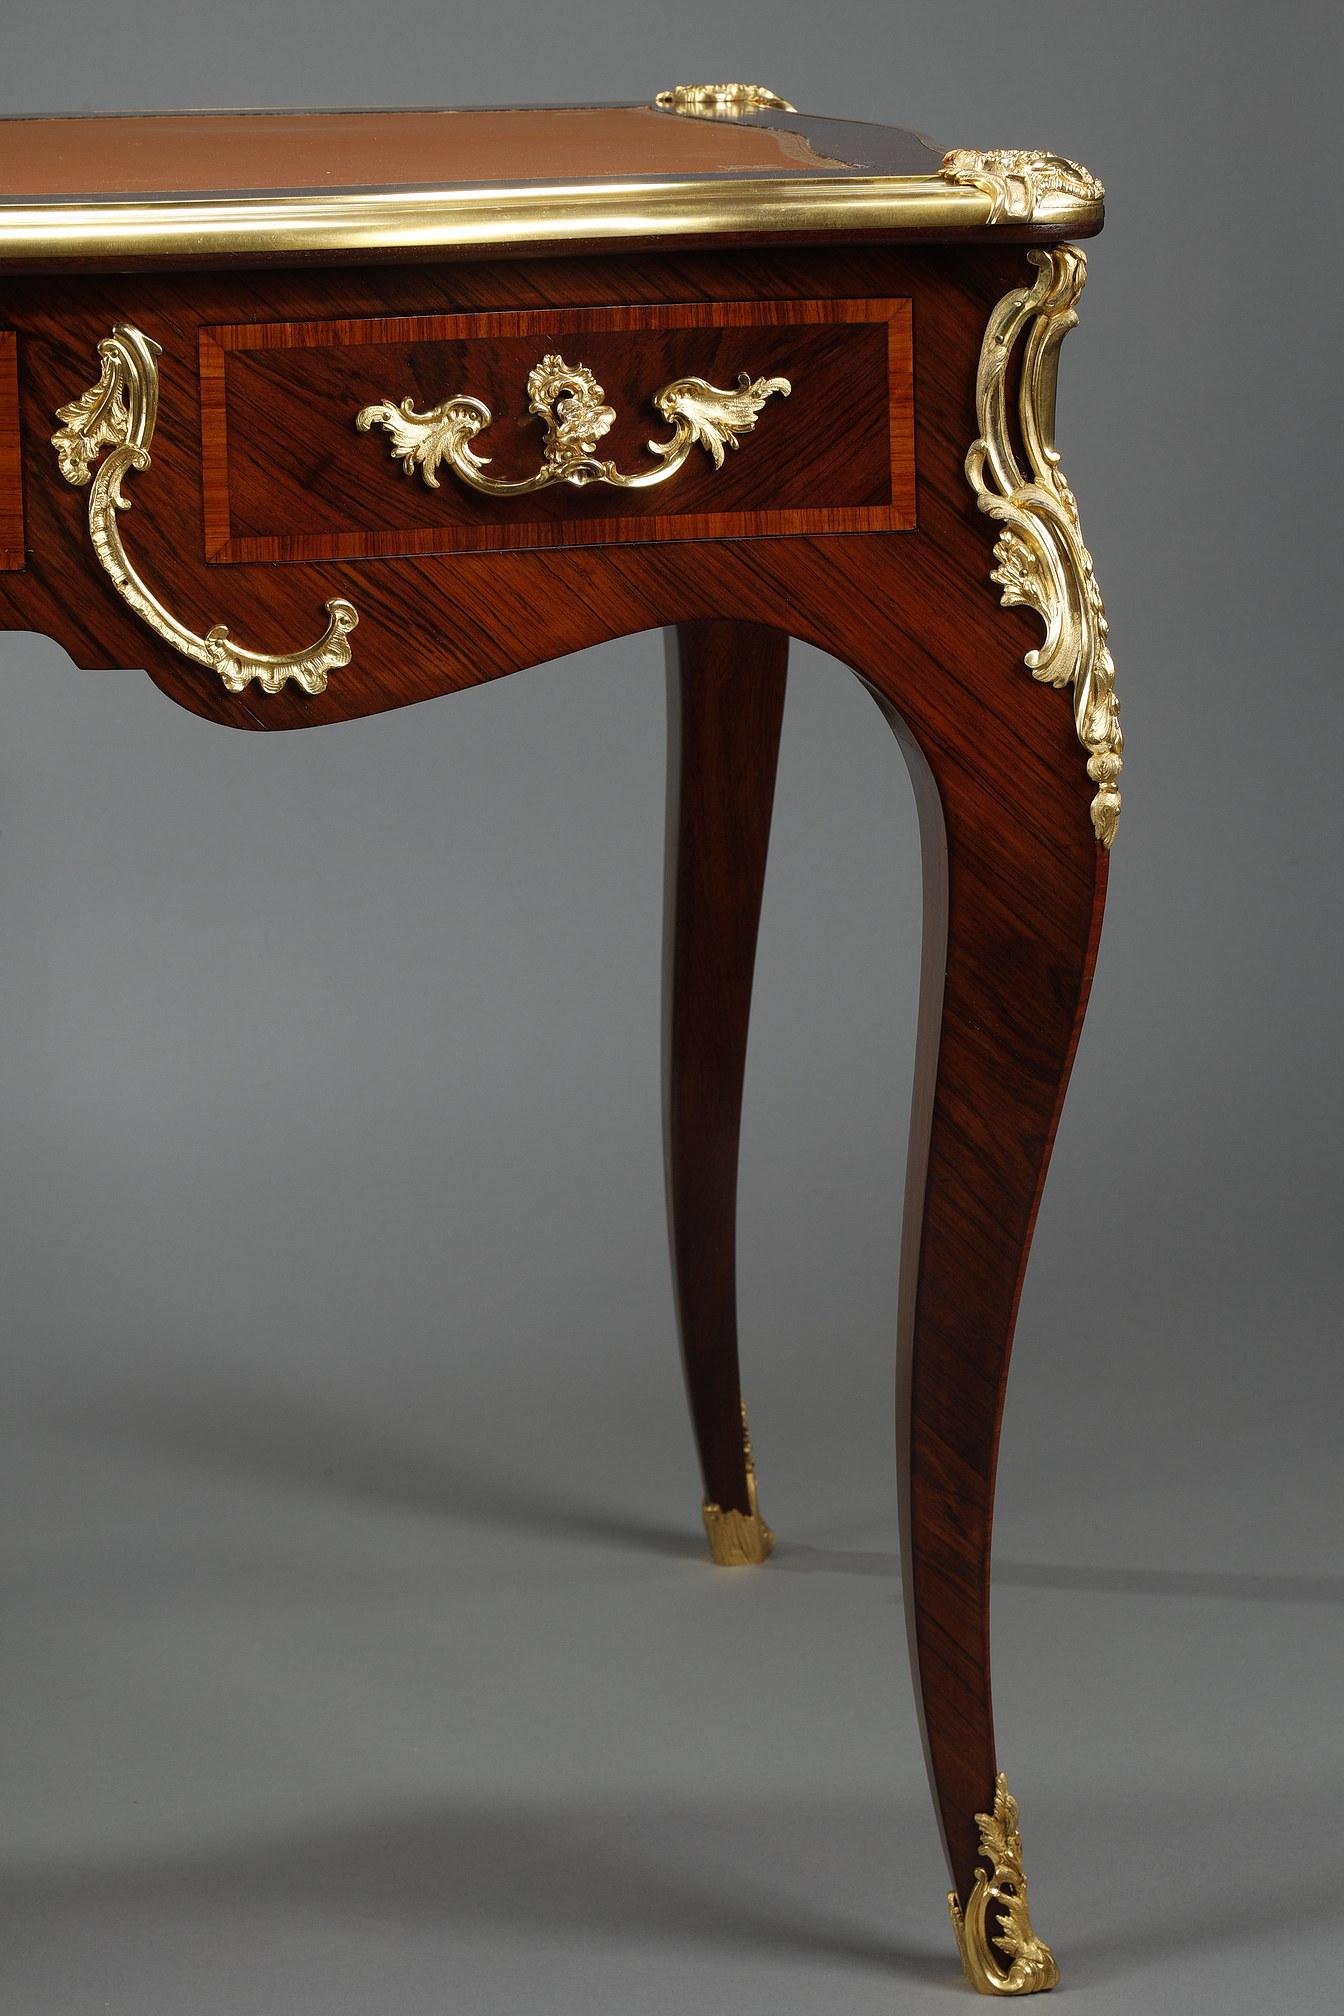 Fretwork Flat desk of style Louis XV, stamped Maurice Rinck